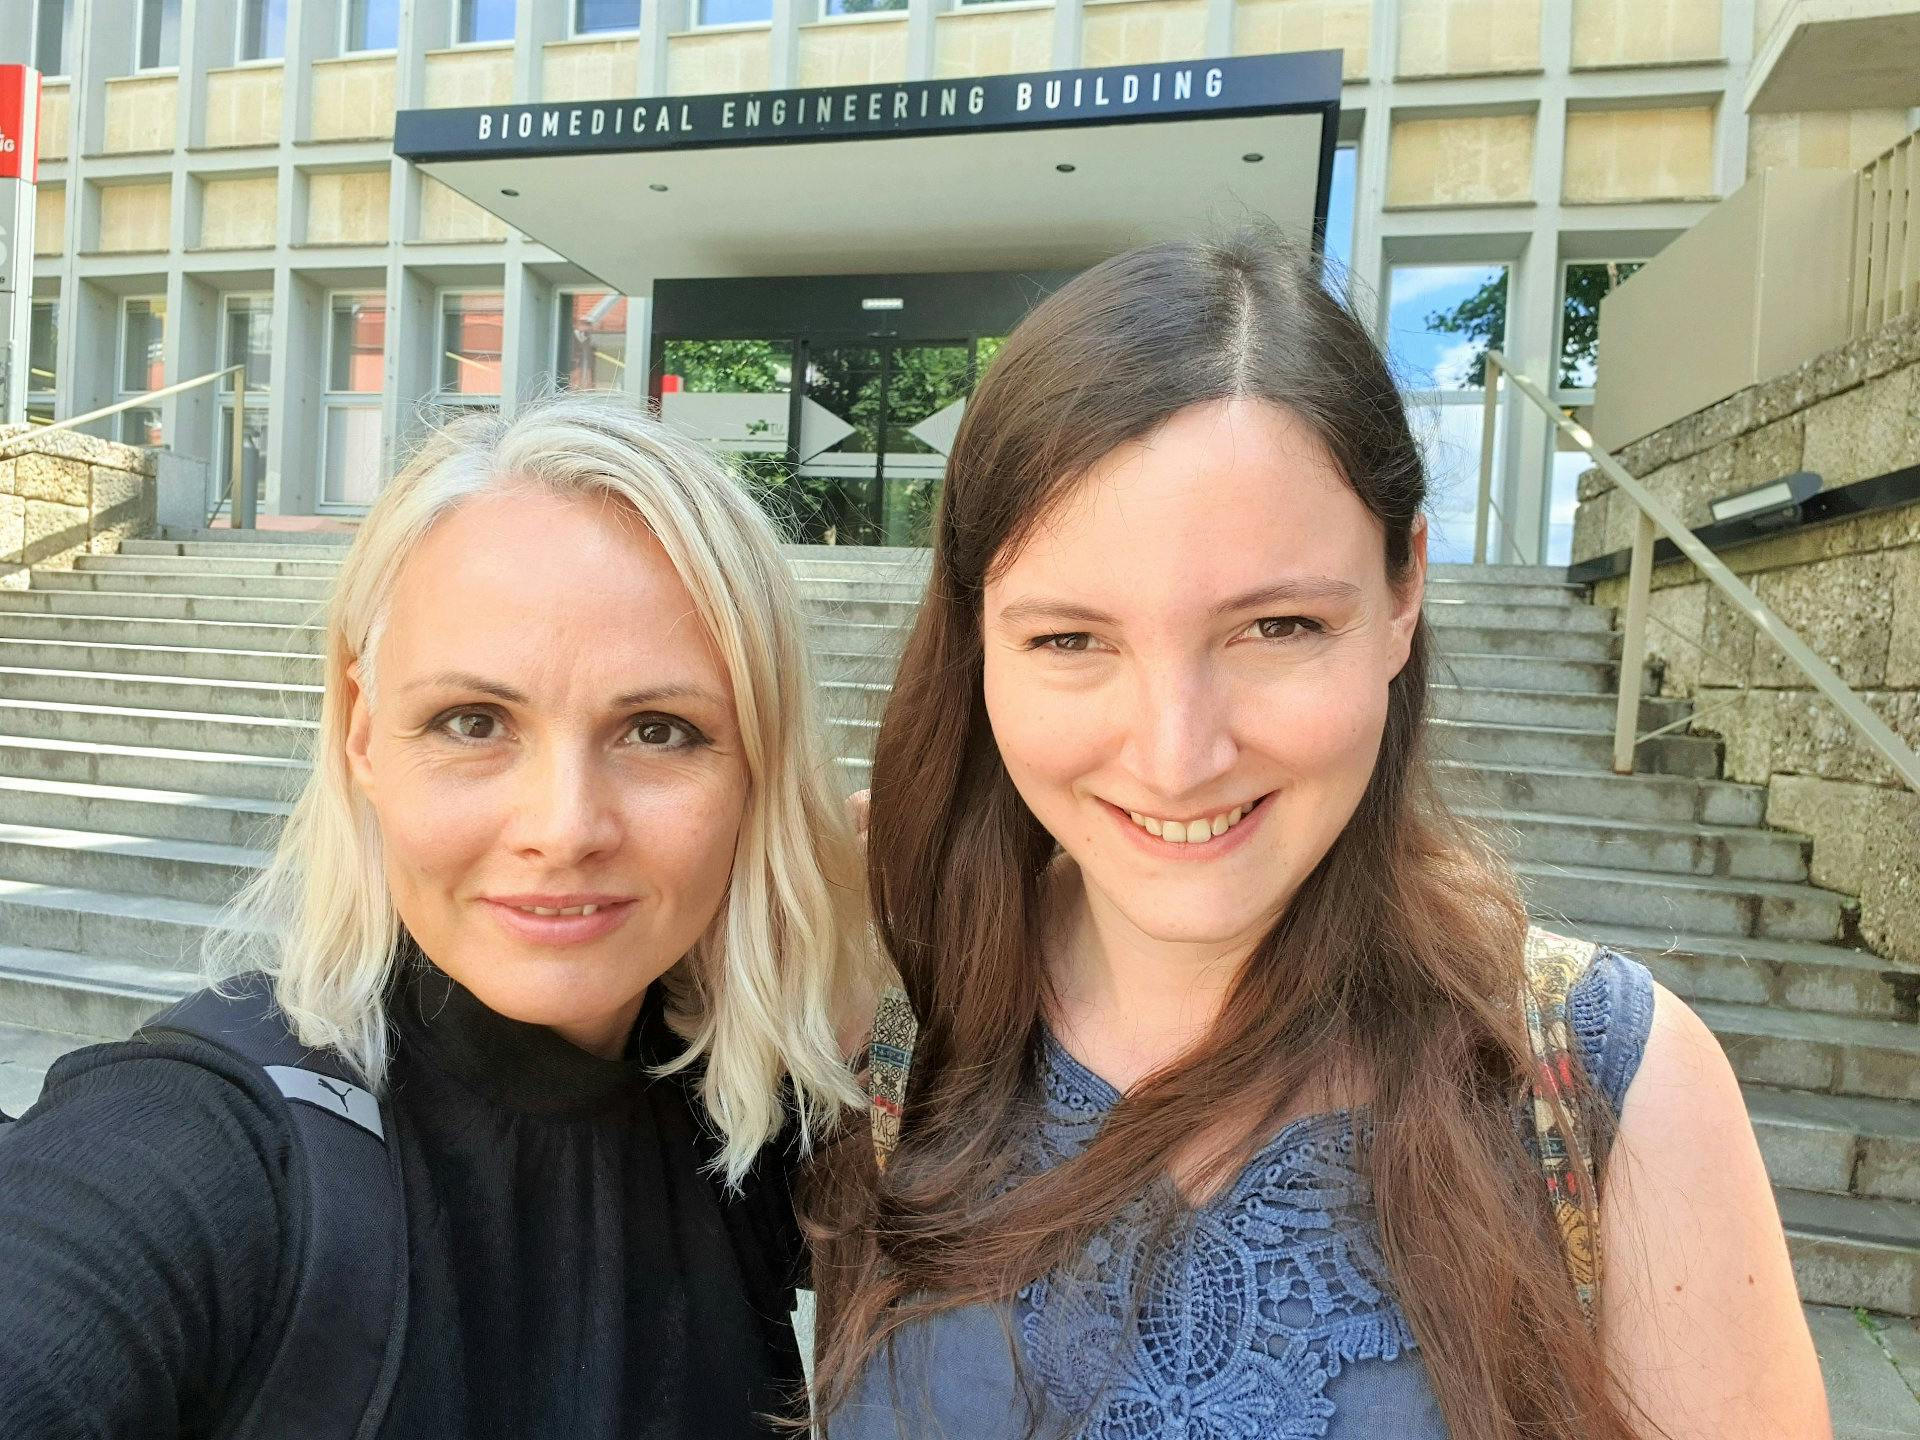 Silja Kempinger and Romana Dorfer in front of Factinsect's Headquarter in the Medical Engineering Building